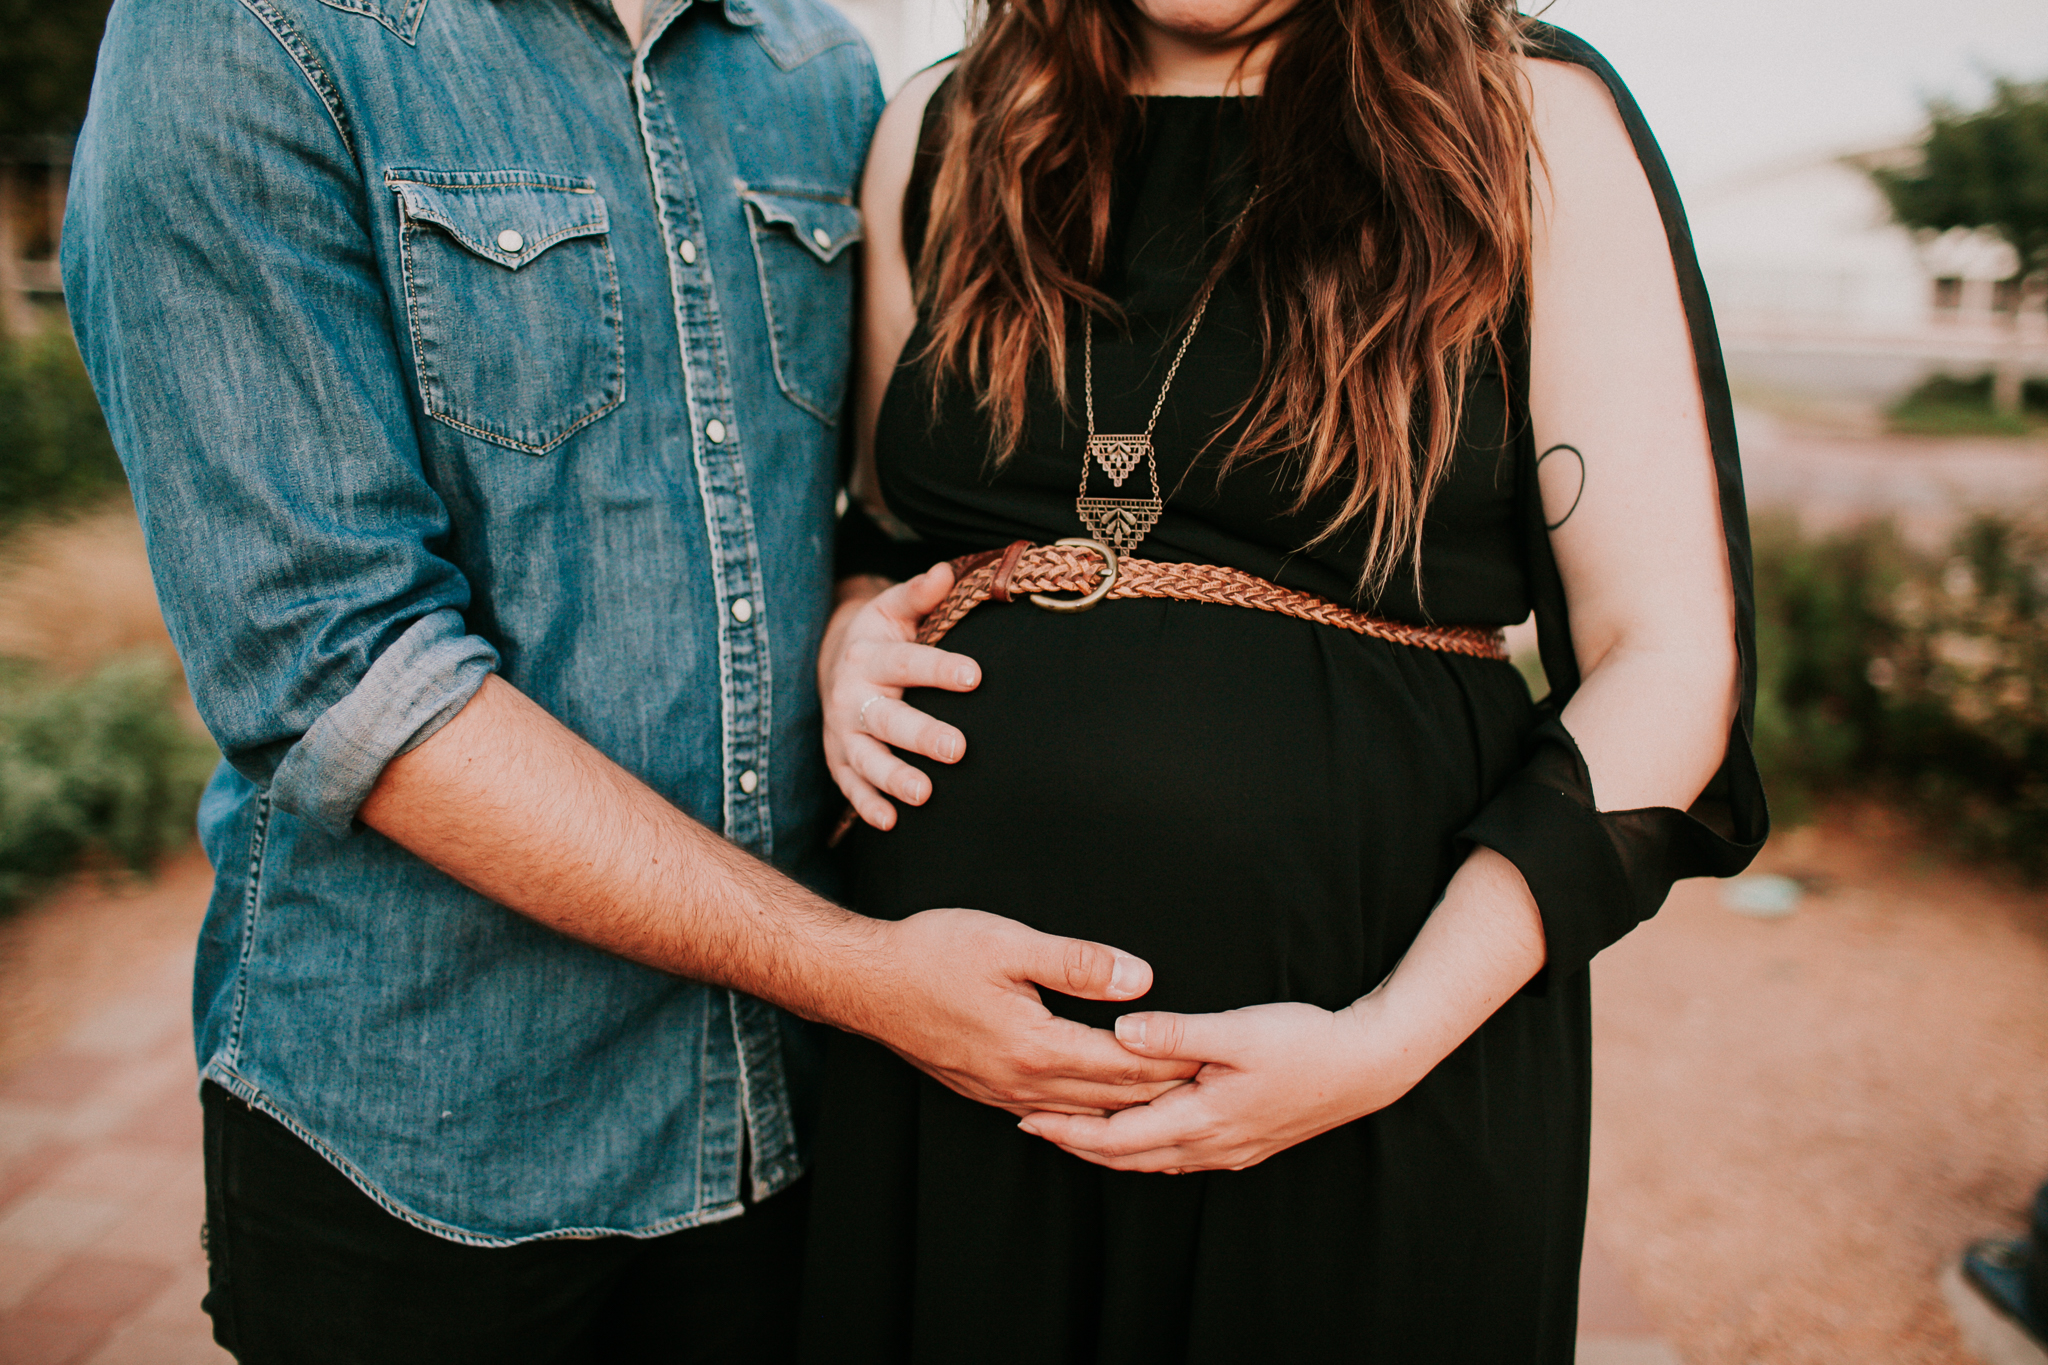 Oklahoma City Modern Maternity Pictures by Emily Nicole Photo